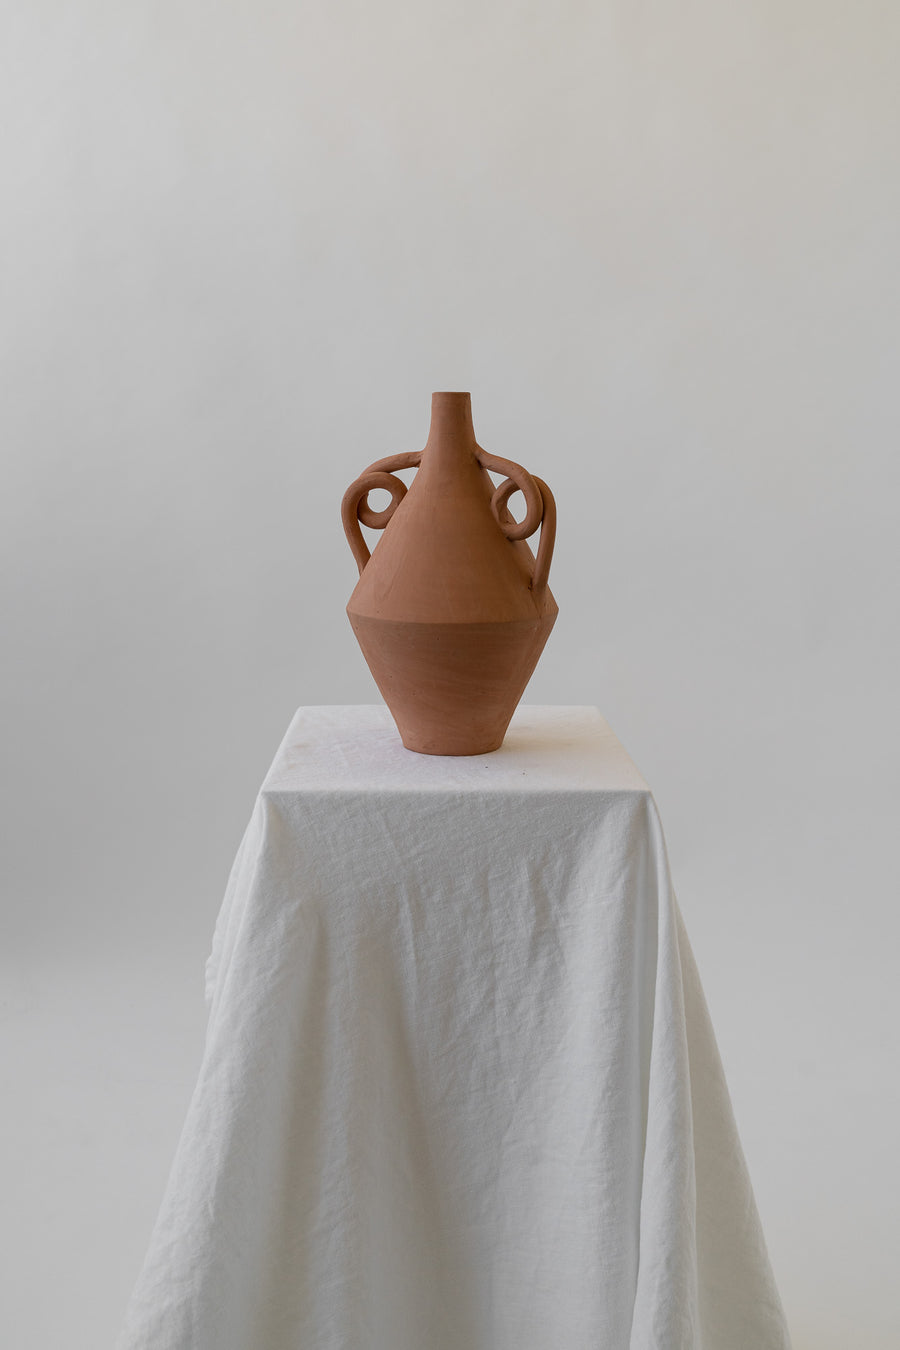 Terracotta Vase with Looped Handles